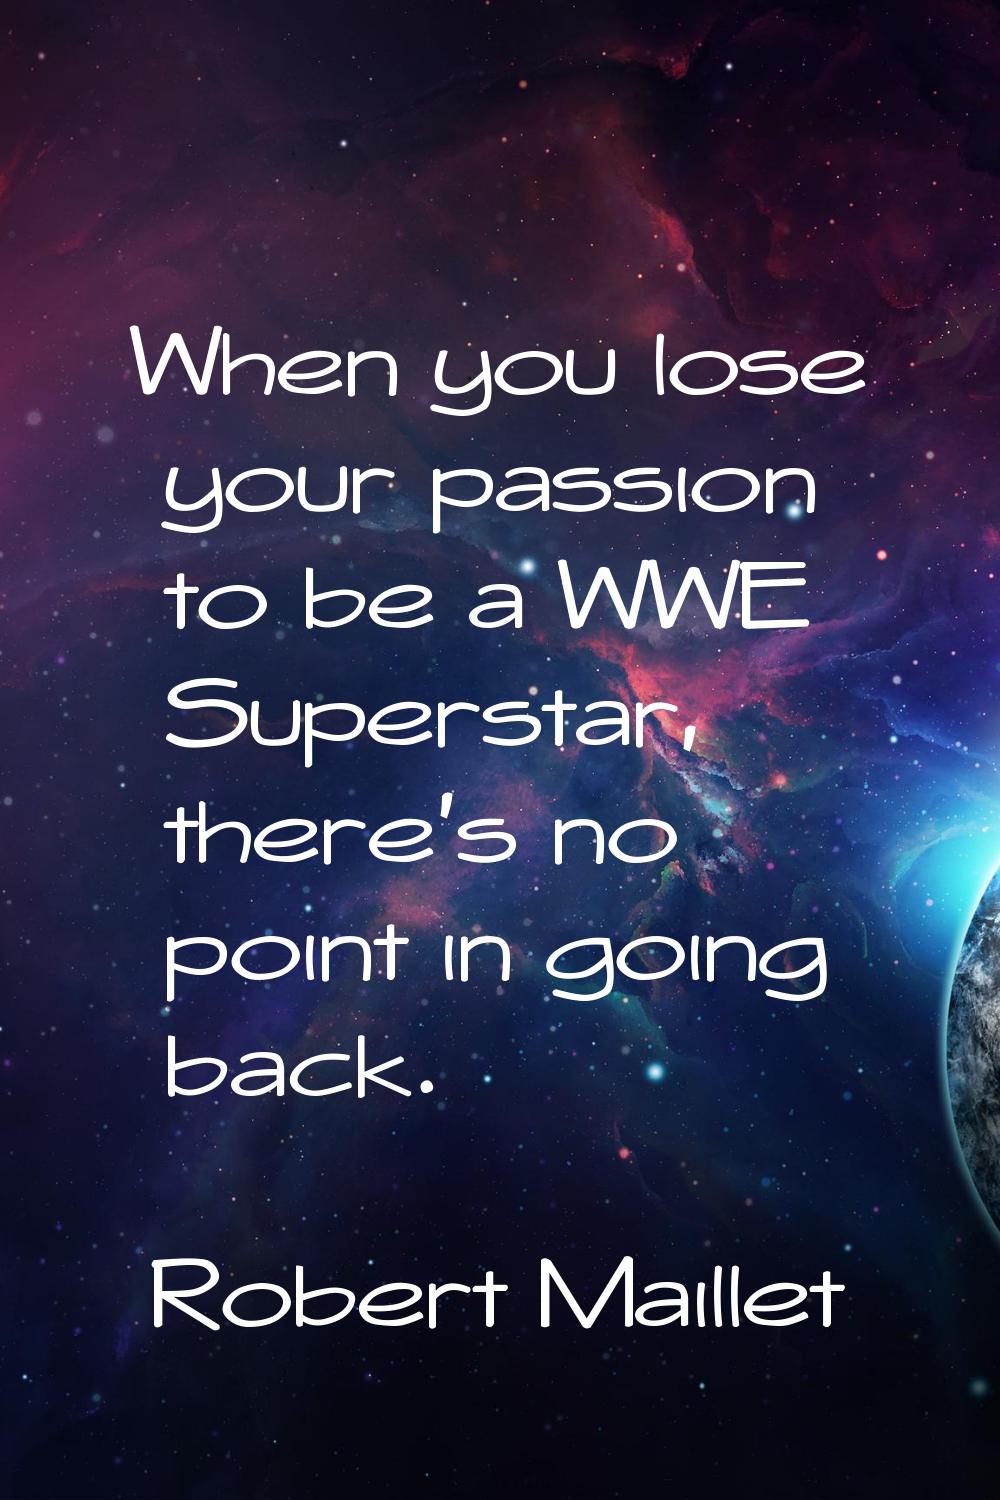 When you lose your passion to be a WWE Superstar, there's no point in going back.